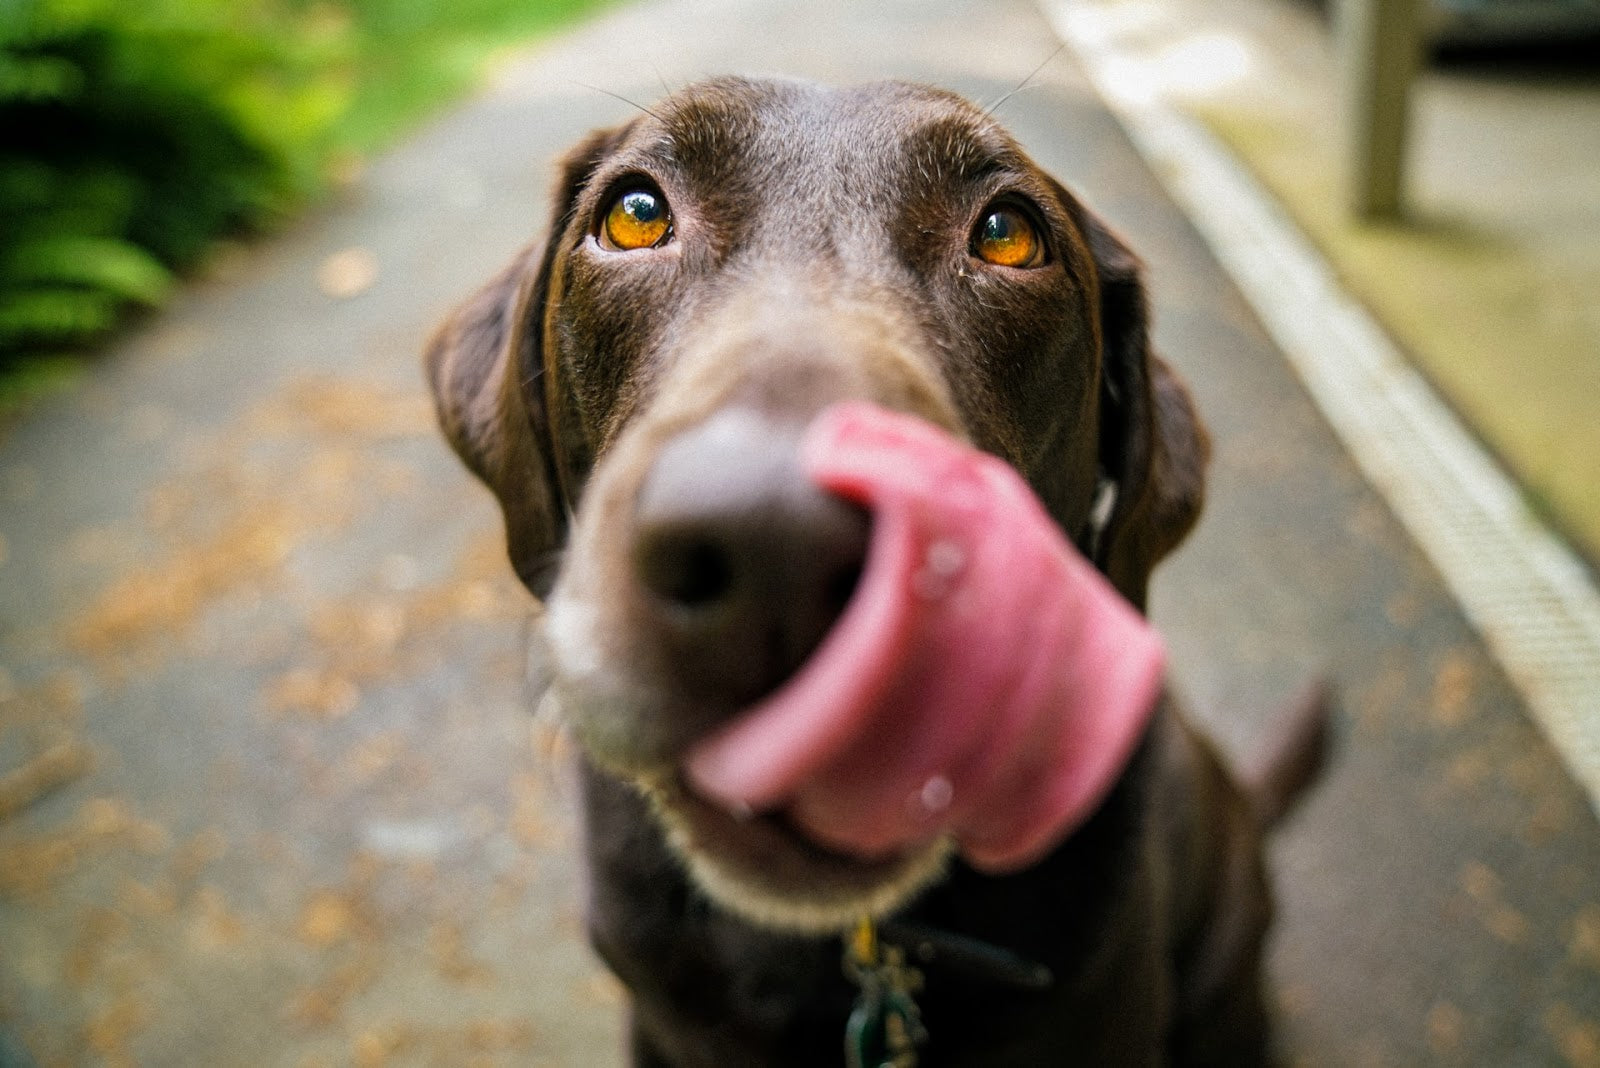 Why Does My Dog Keep Licking His Butt? Cleaning Tricks to Get Your Pet to Stop